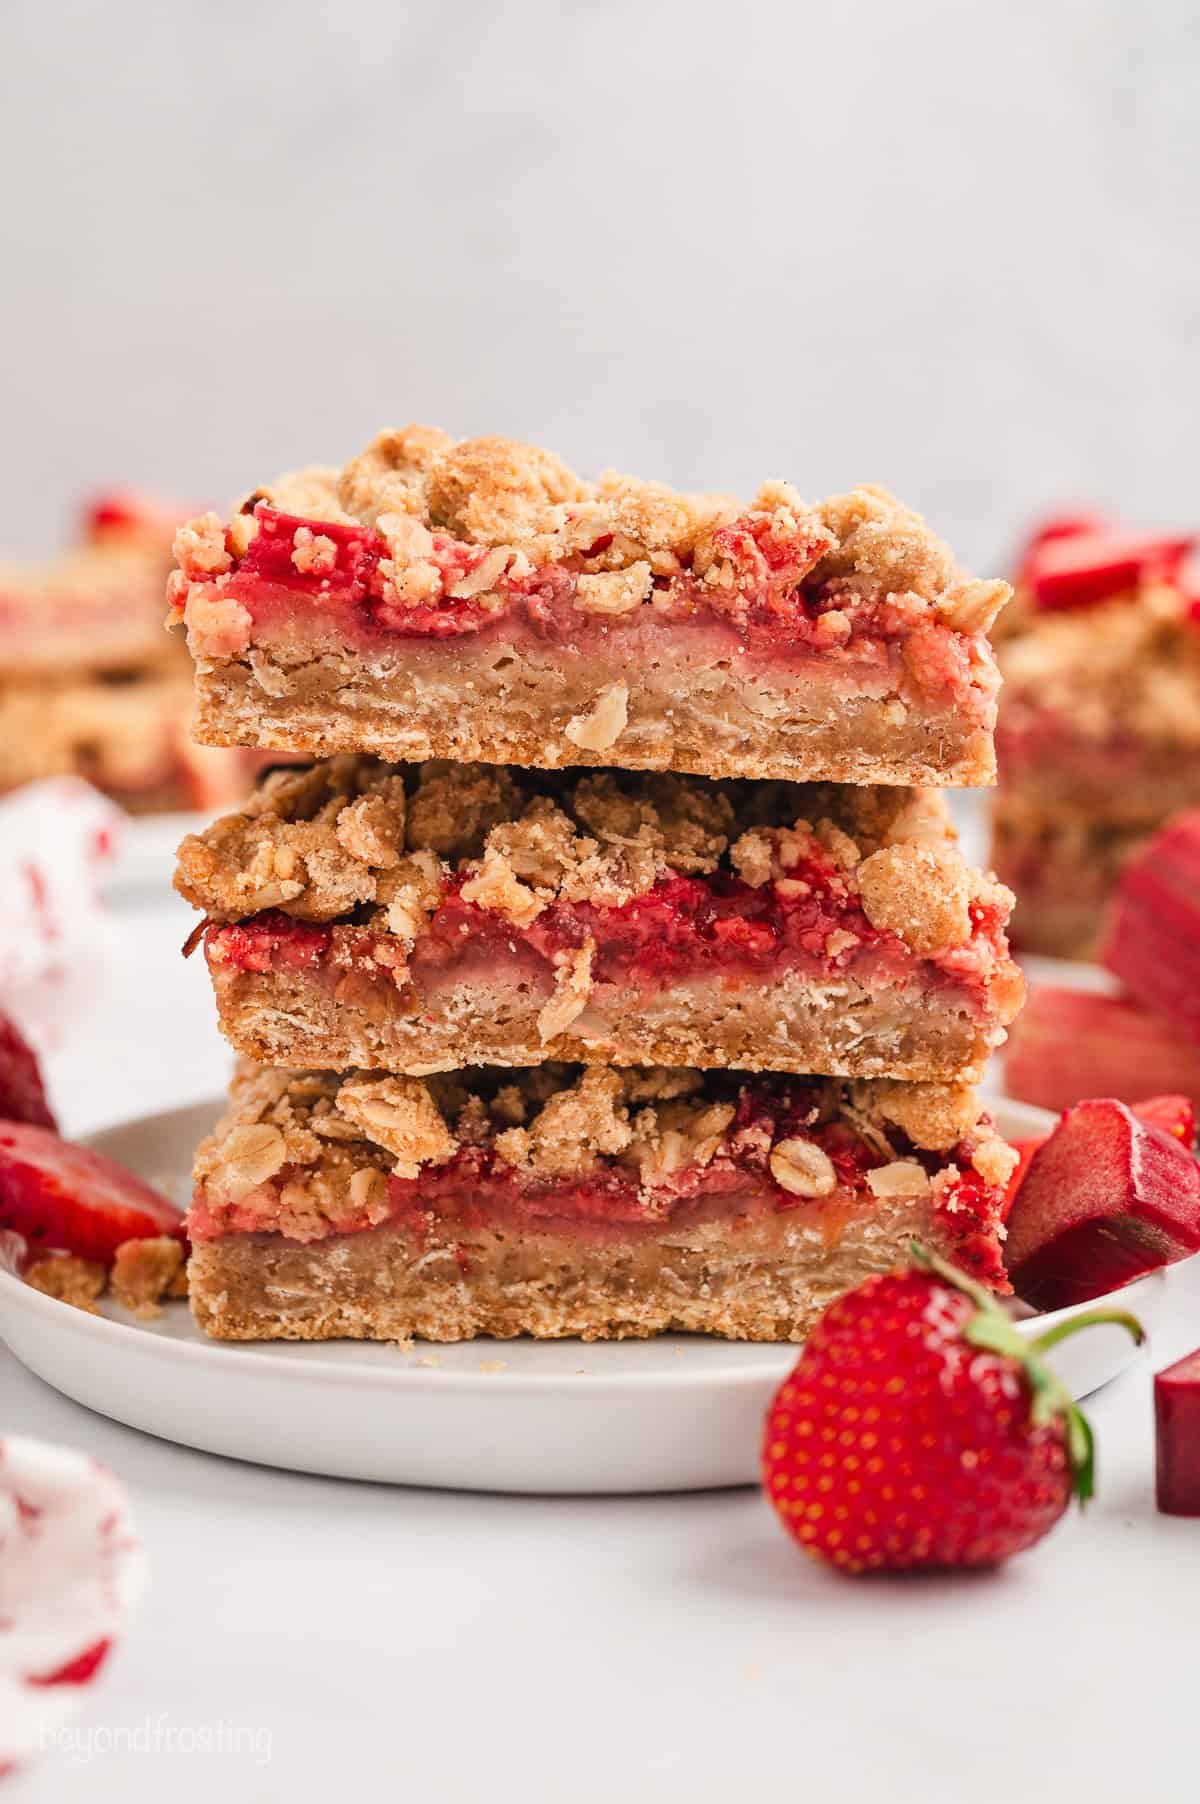 A stack of three strawberry rhubarb bars on a white plate next to a fresh strawberry.